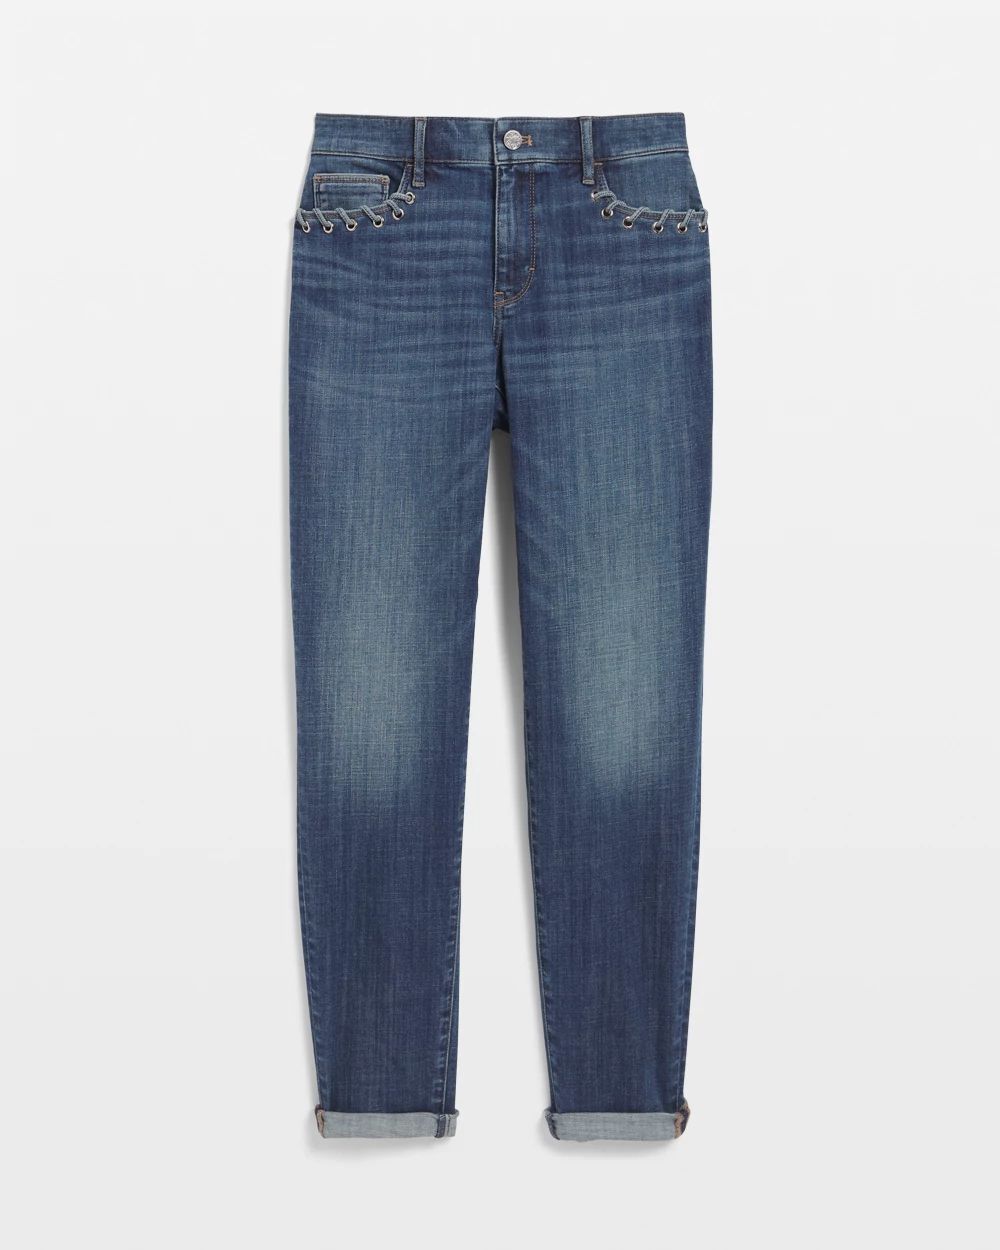 Mid-Rise Everyday Soft Denim™ Grommet Girlfriend Jean click to view larger image.